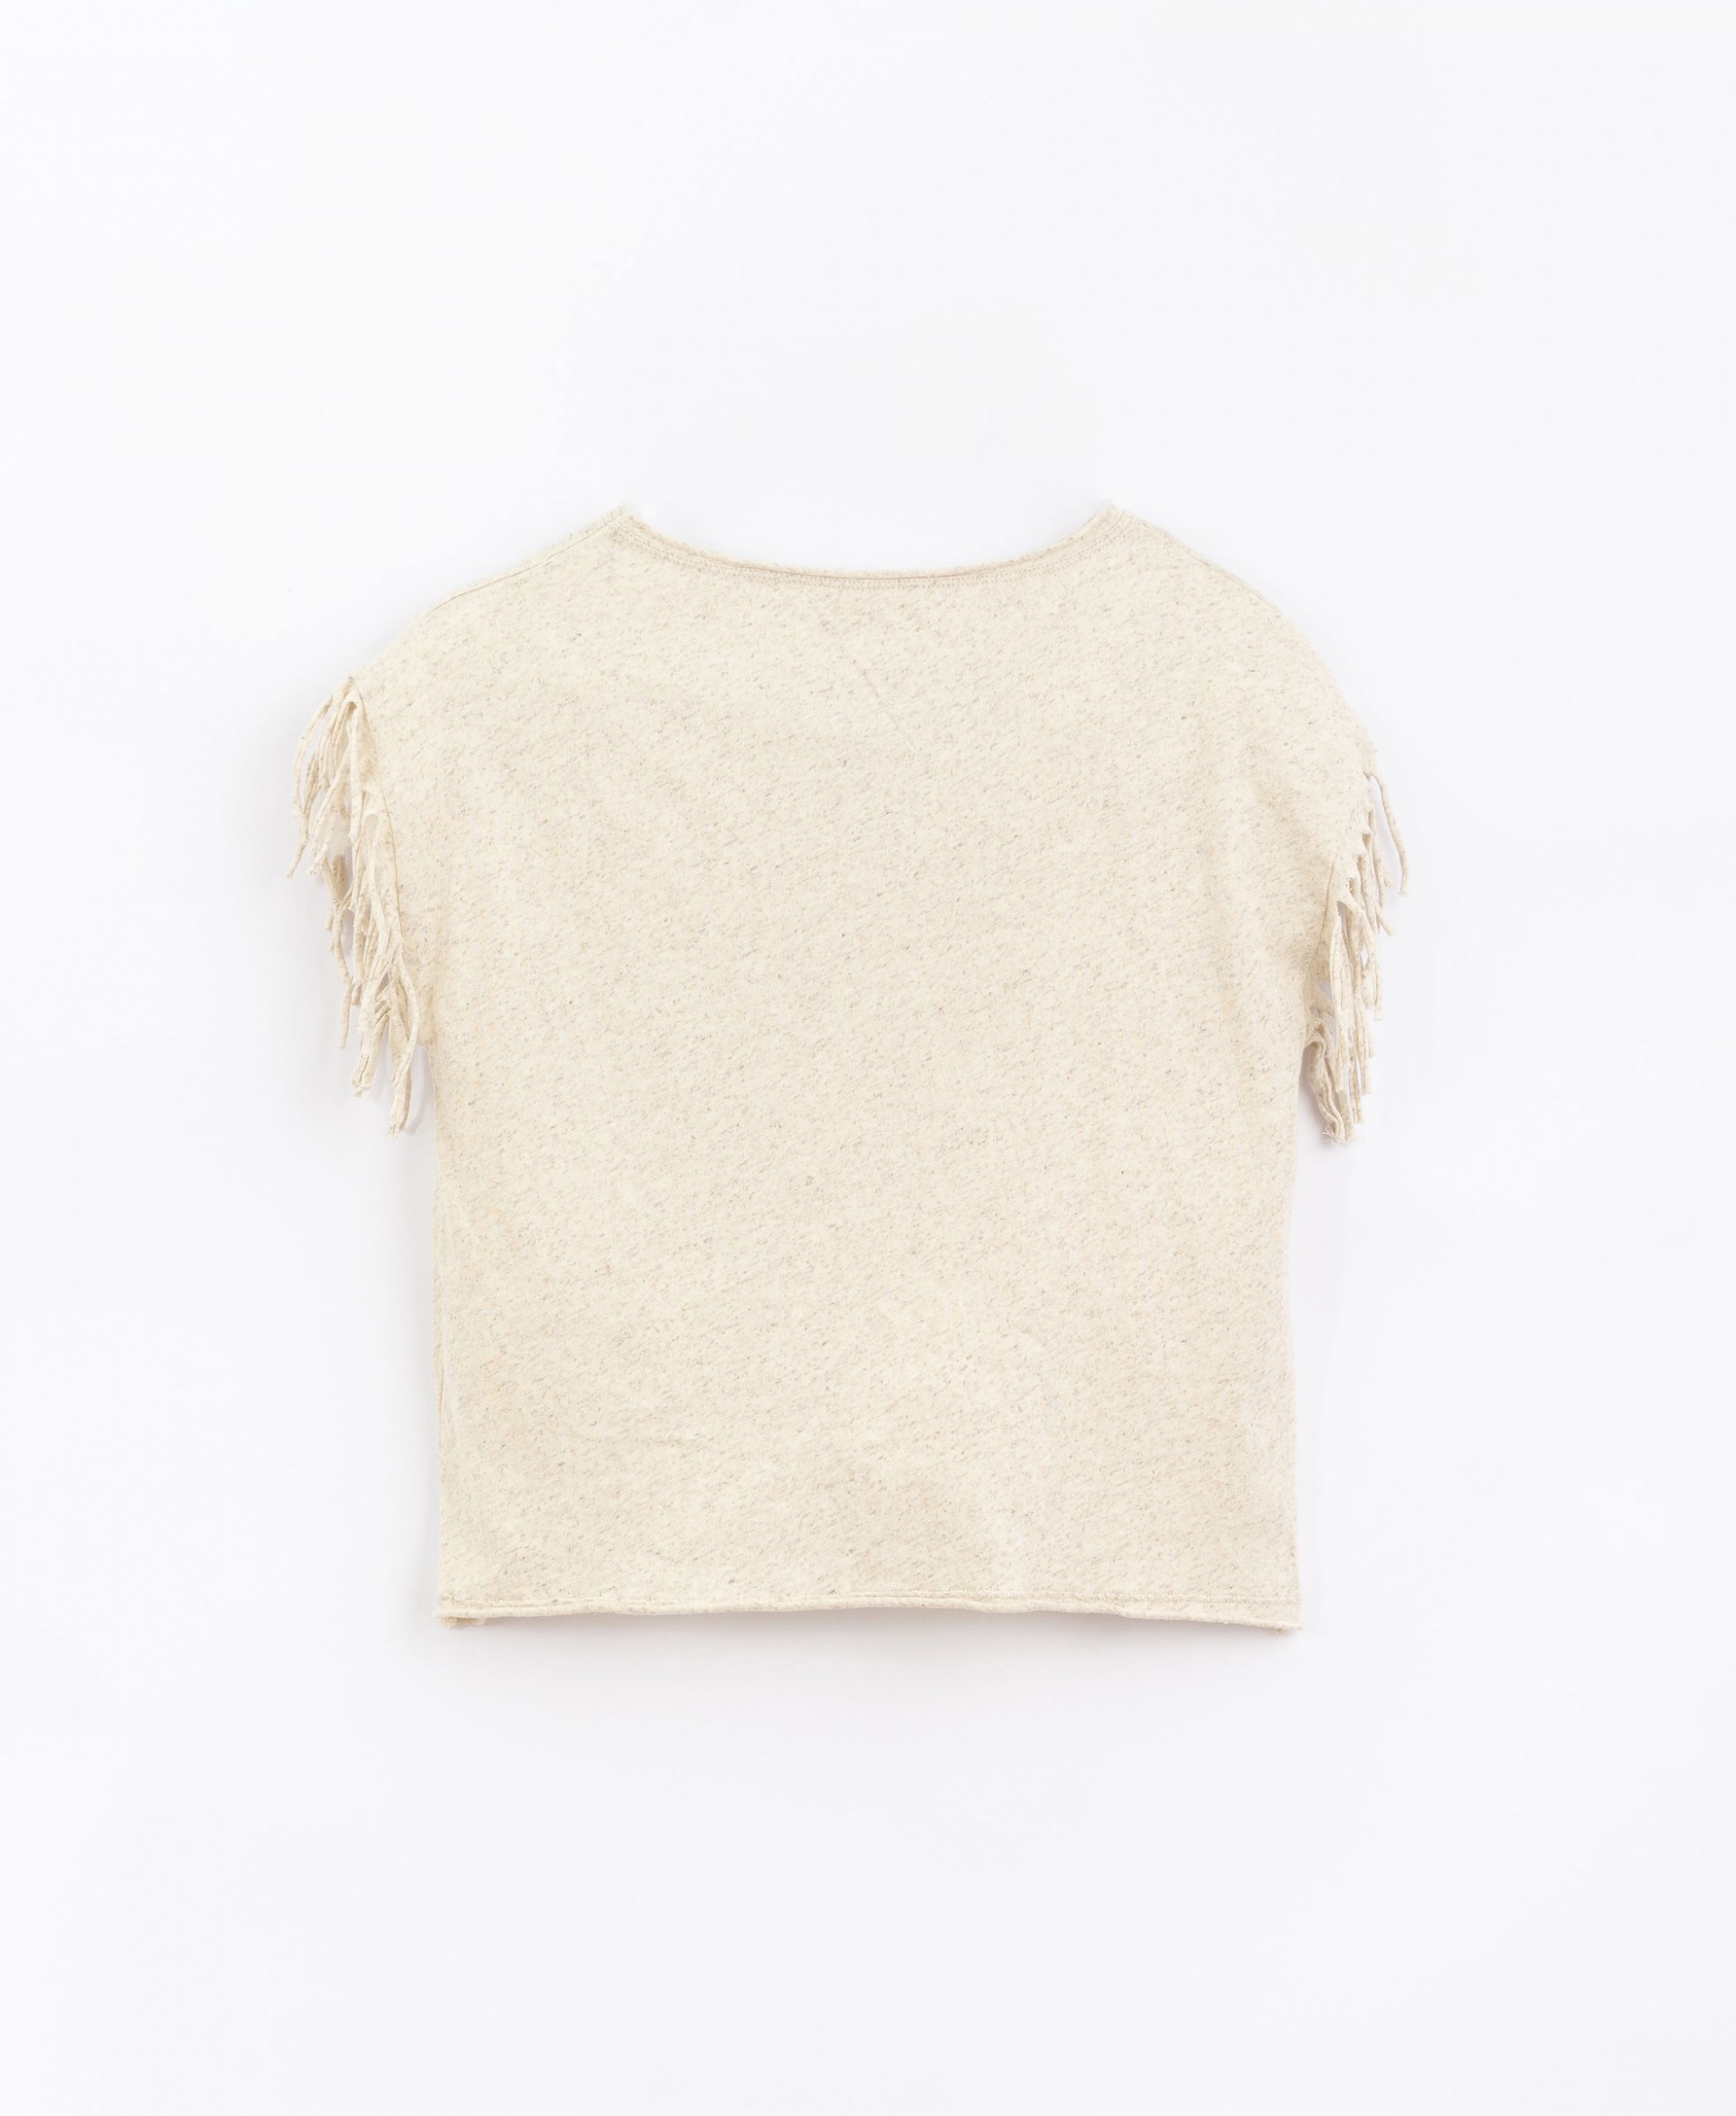 T-shirt in blend of organic cotton and hemp | Basketry